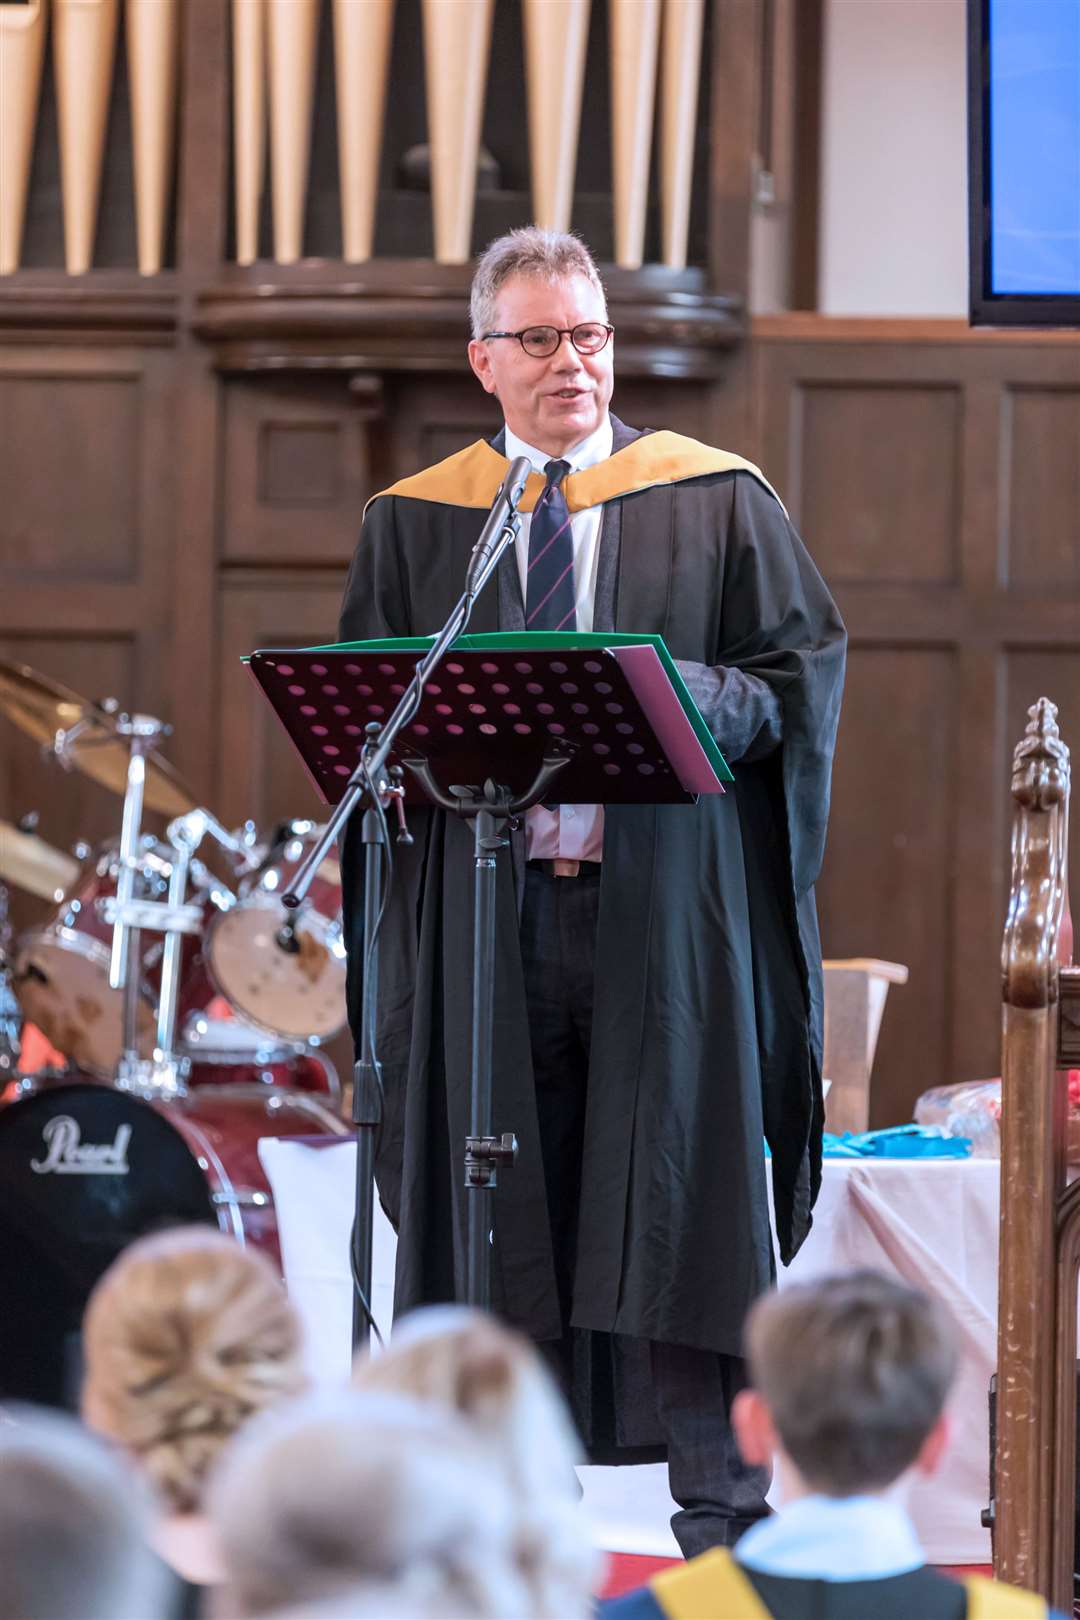 Principal Donald MacBeath addresses graduands before receiving their awards during last year's graduation ceremony in Thurso.